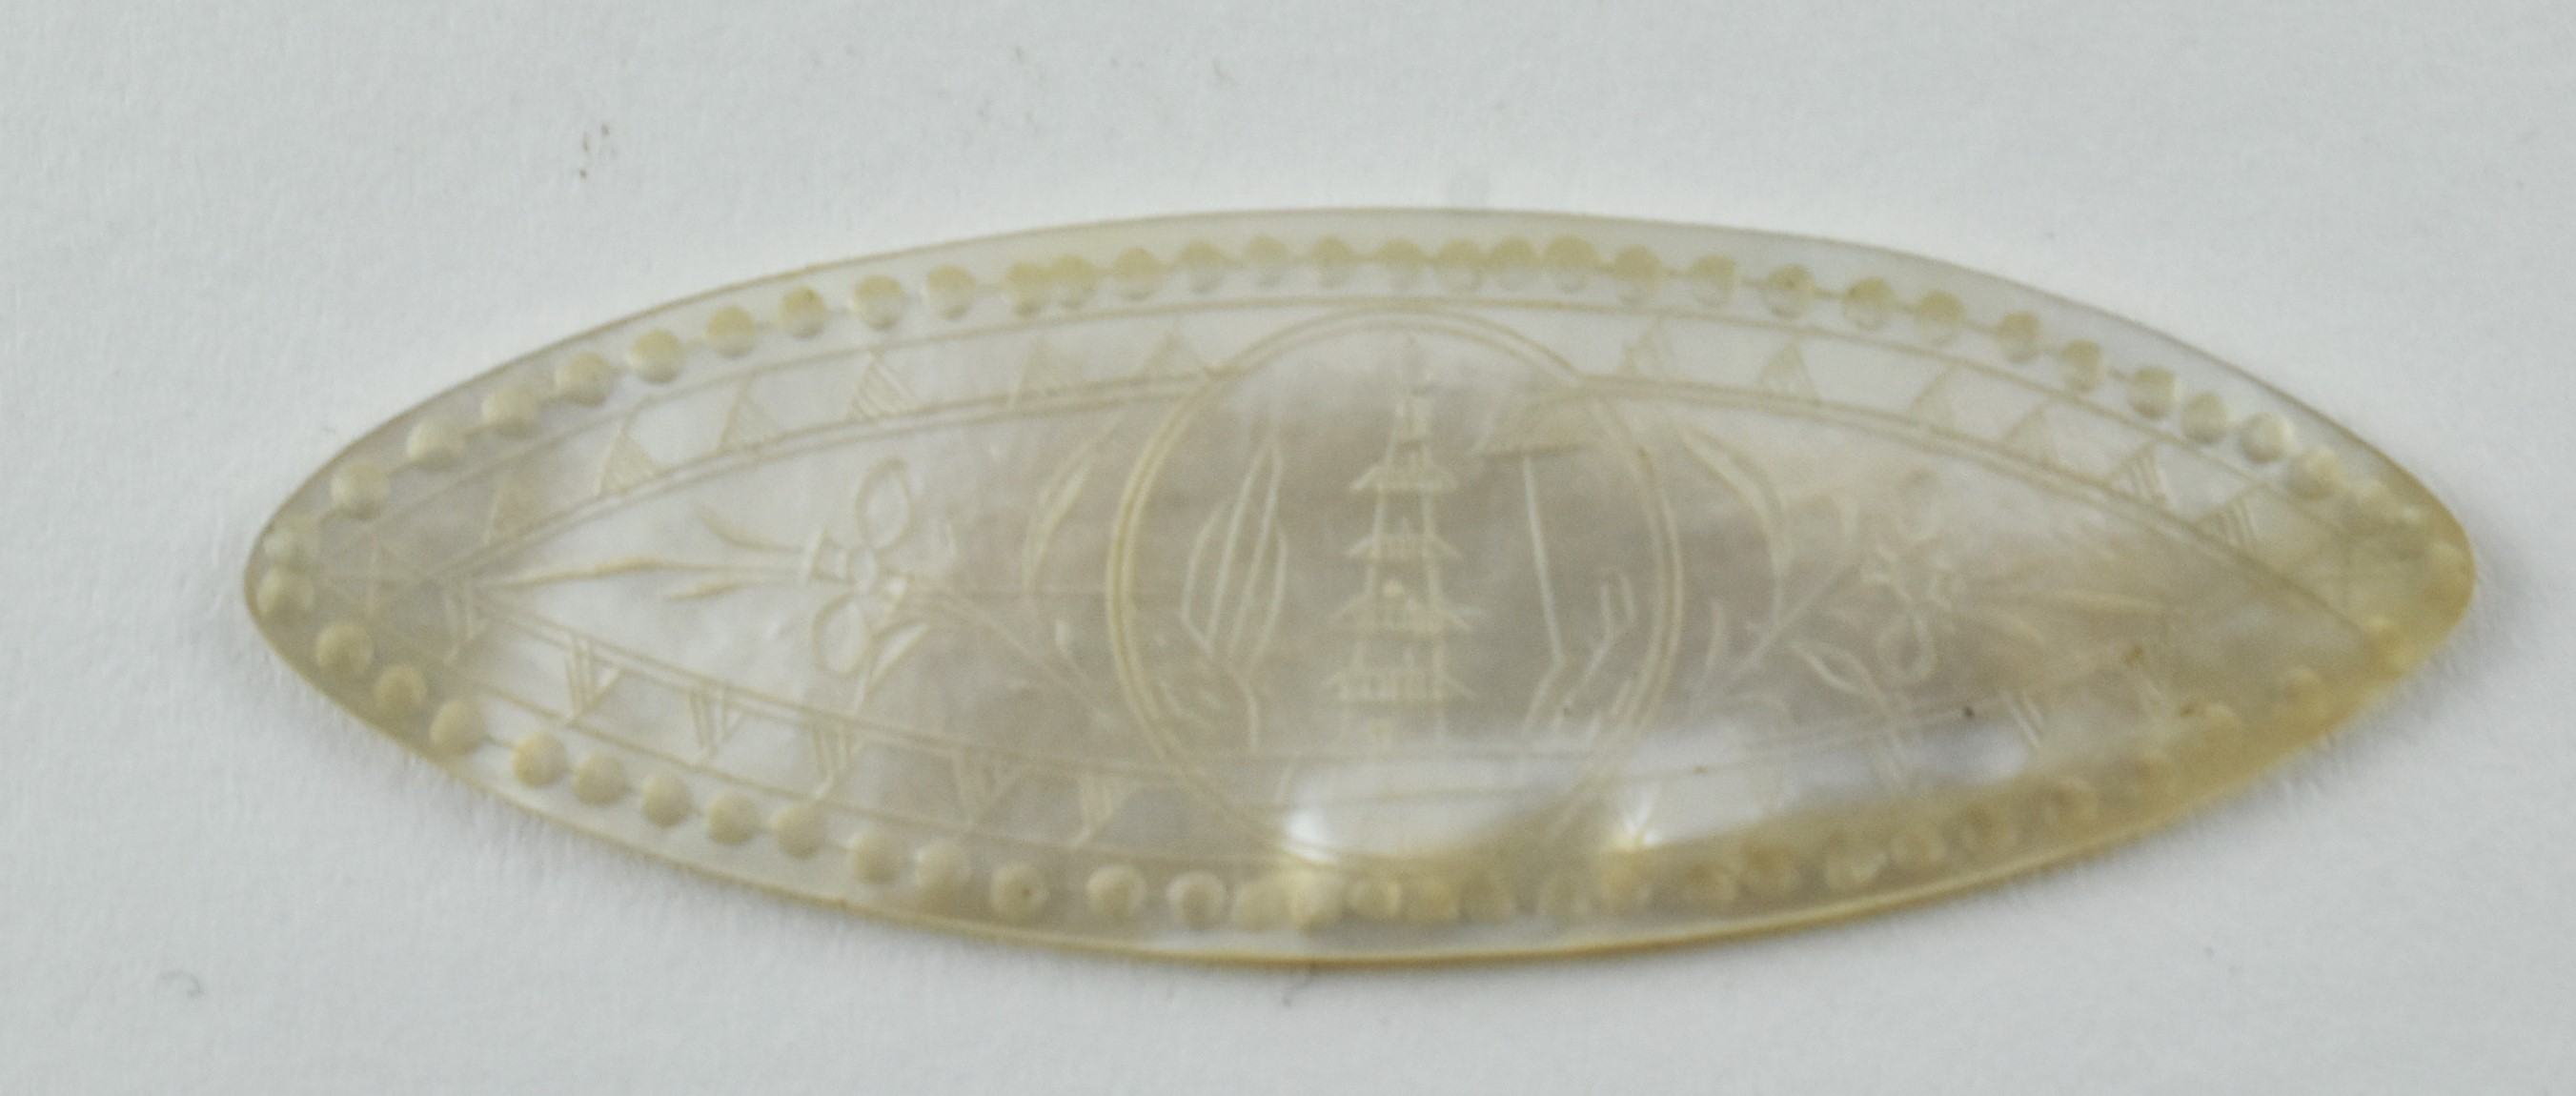 QING DYNASTY MOTHER OF PEARL GAMING TOKENS 清十三行贝母筹码 - Image 9 of 11